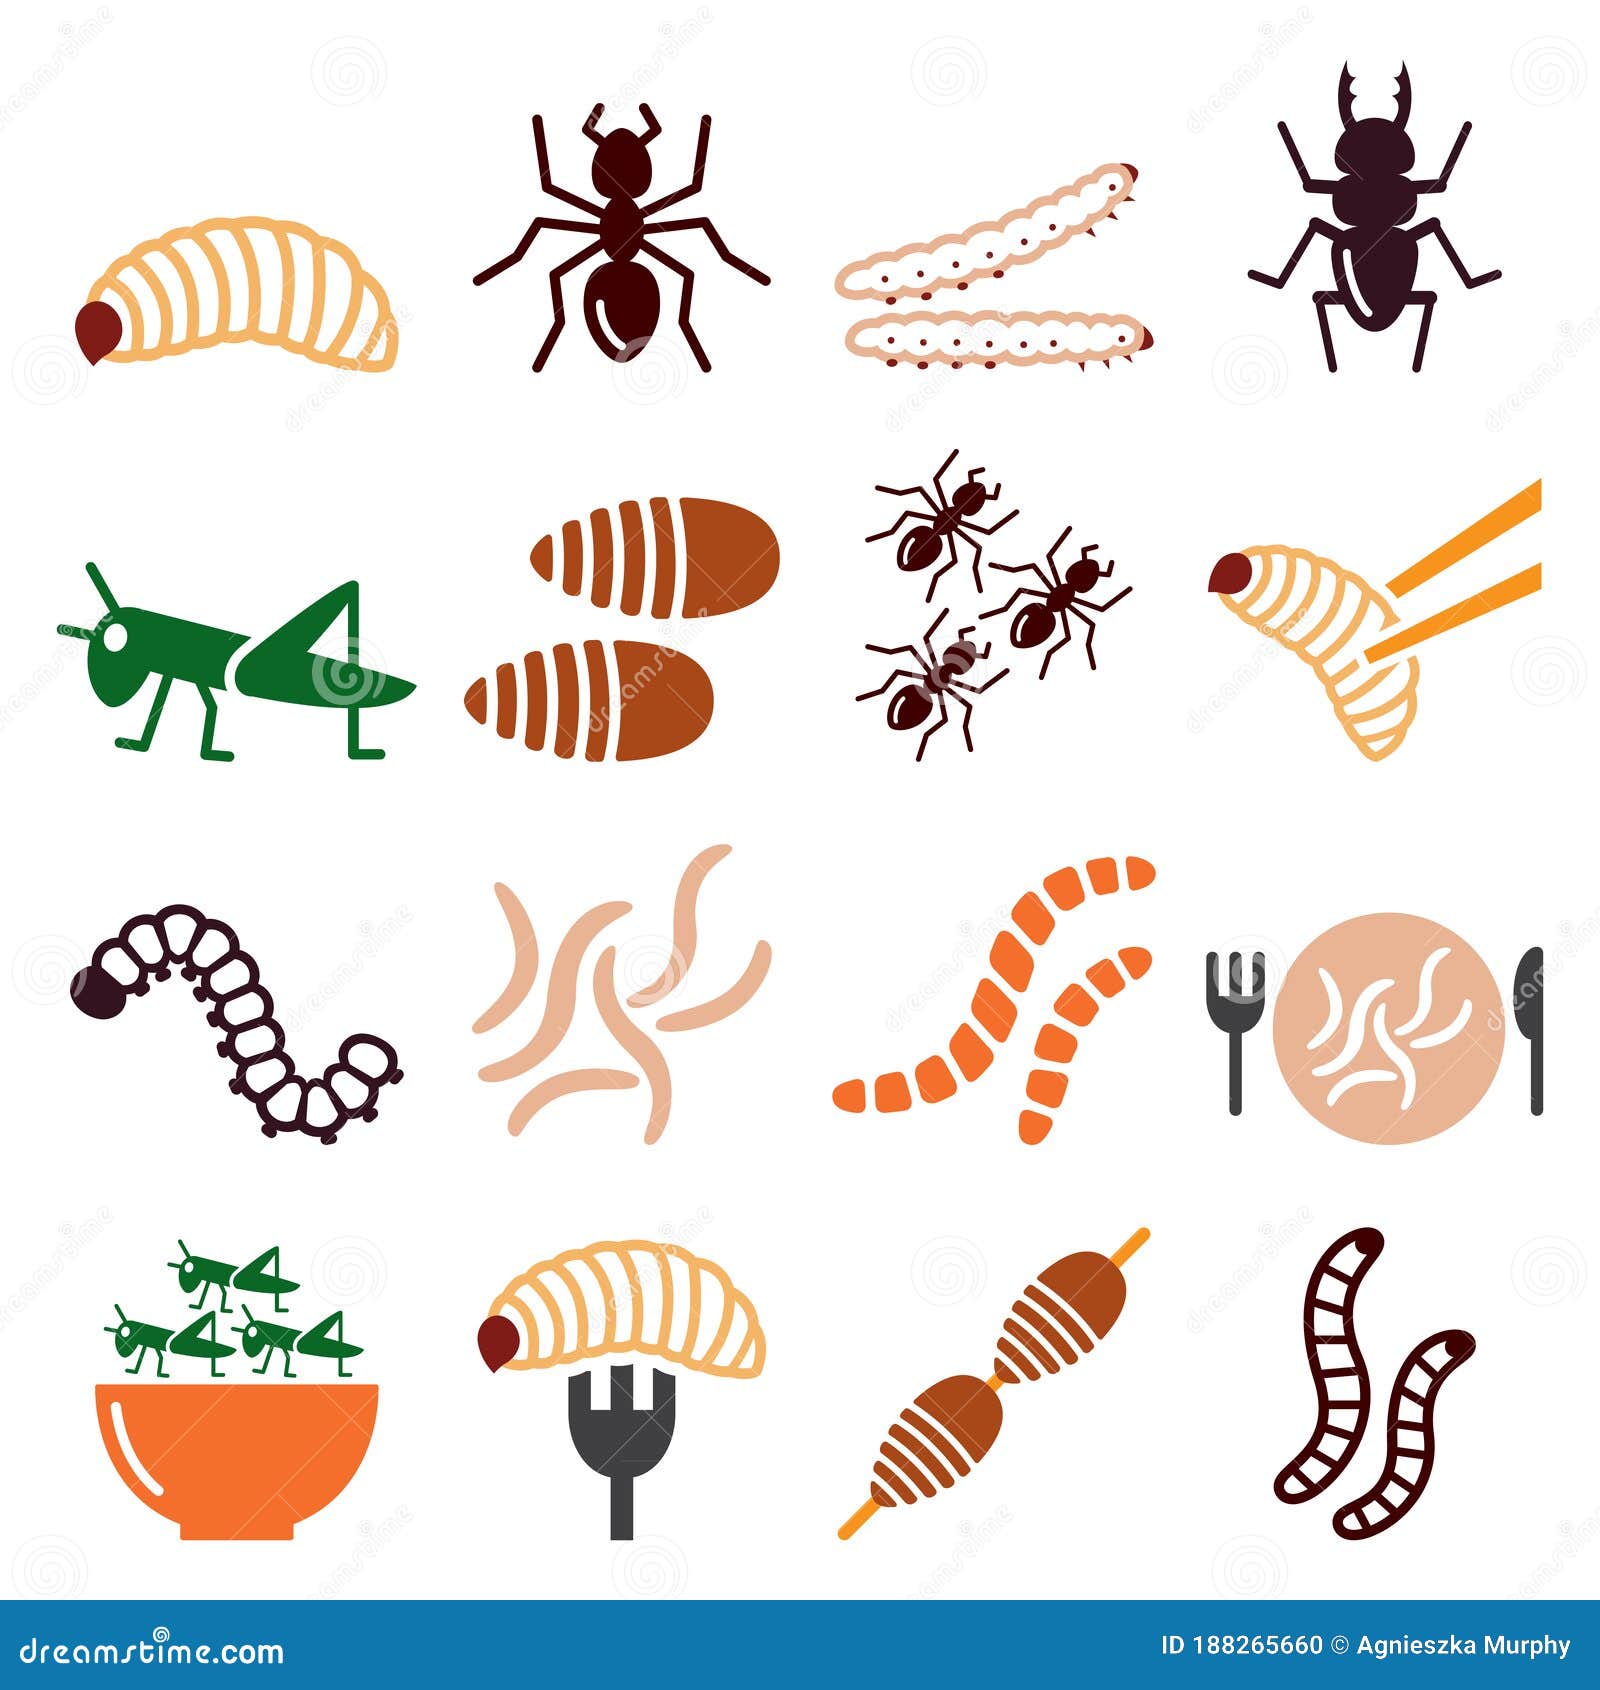 edible worms and insects  icons set - alternative source on protein in food